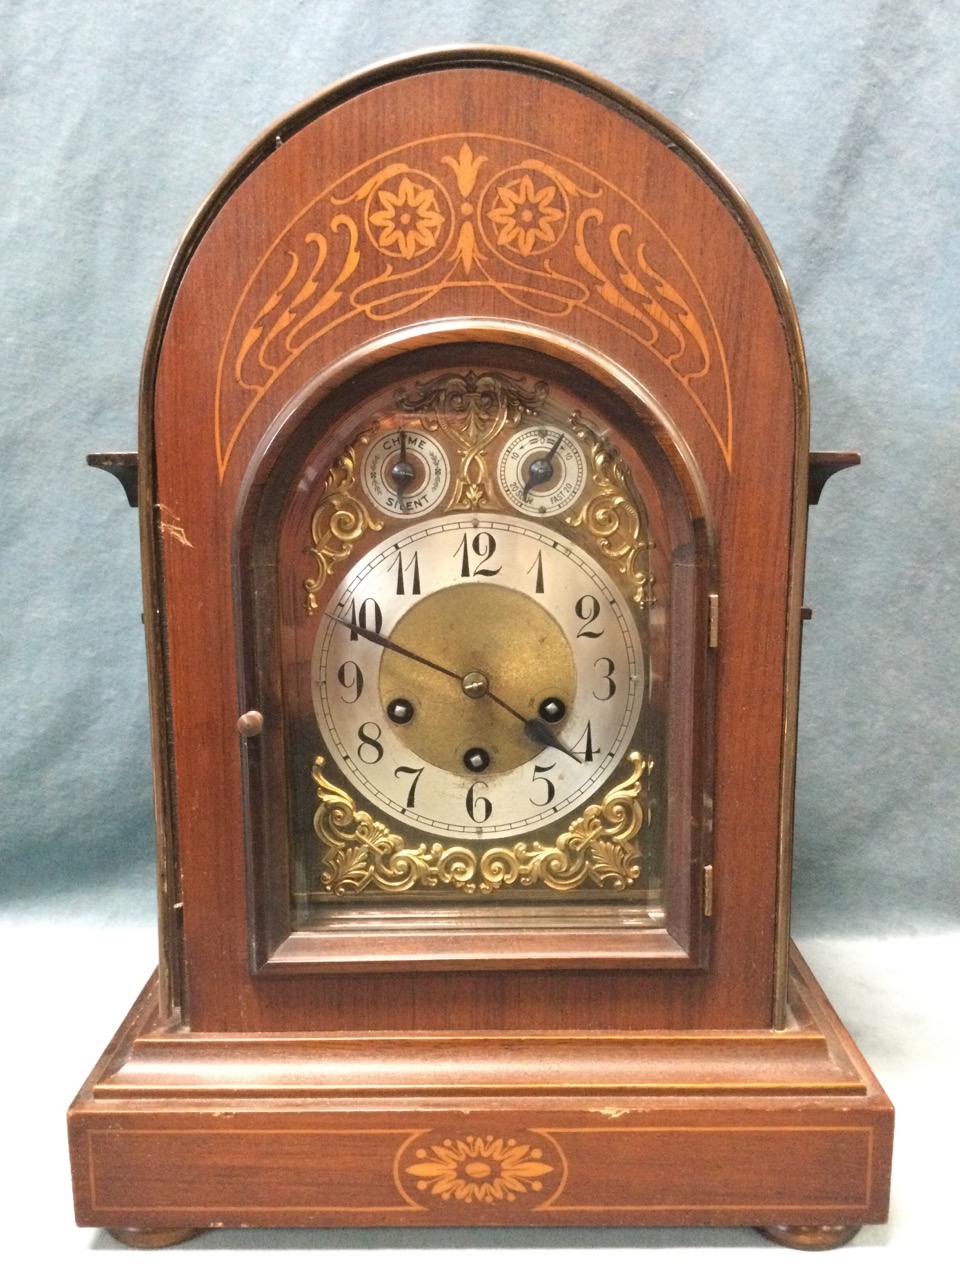 A large late C19th domed top architectural style clock with art nouveau style decoration to